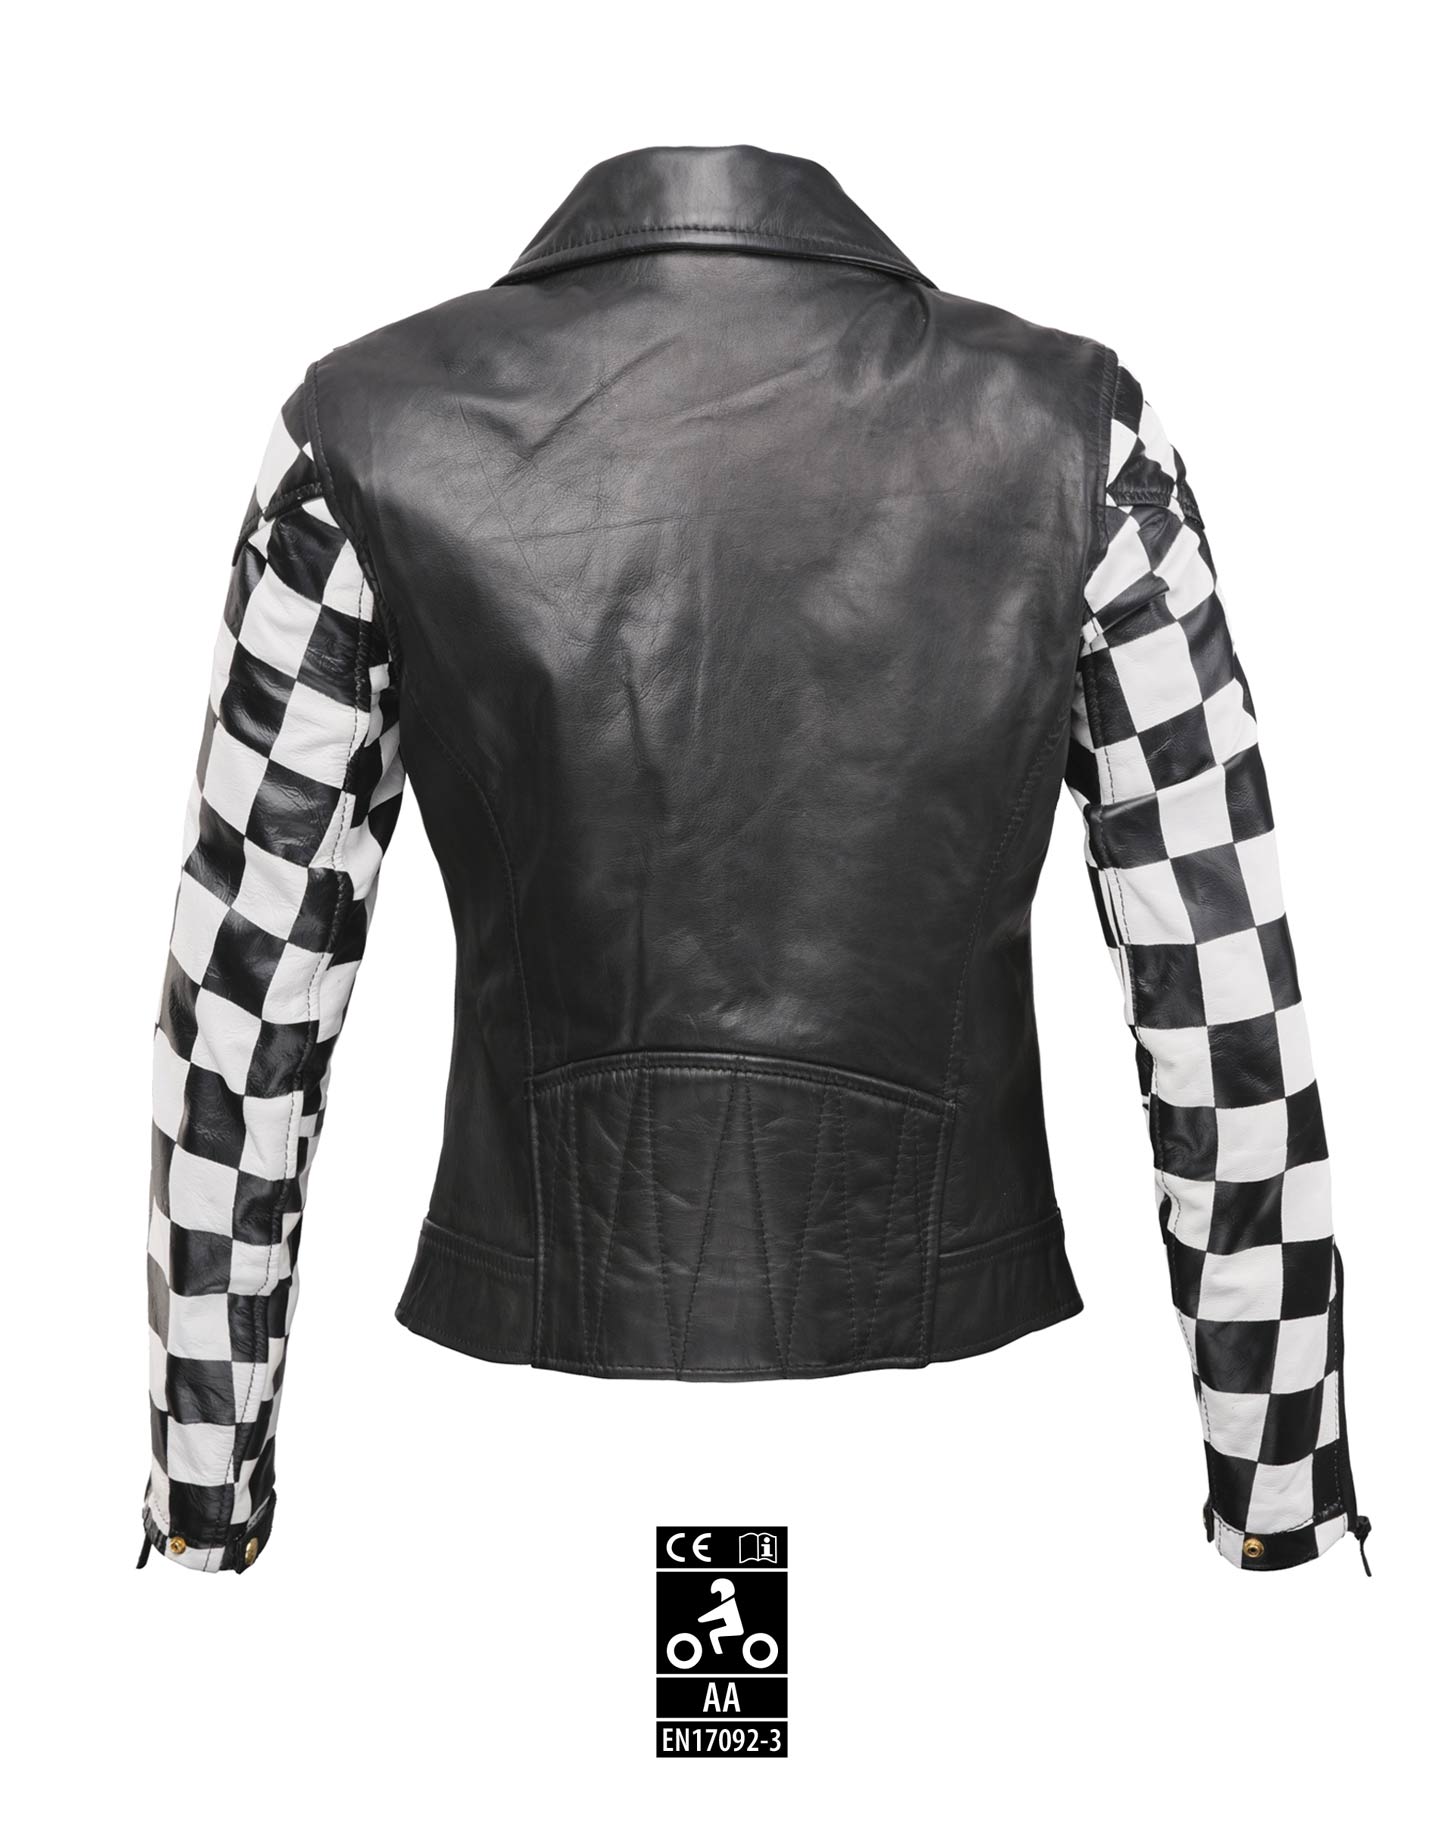 Chessboard  design leather motorcycle jacket from eudoxie